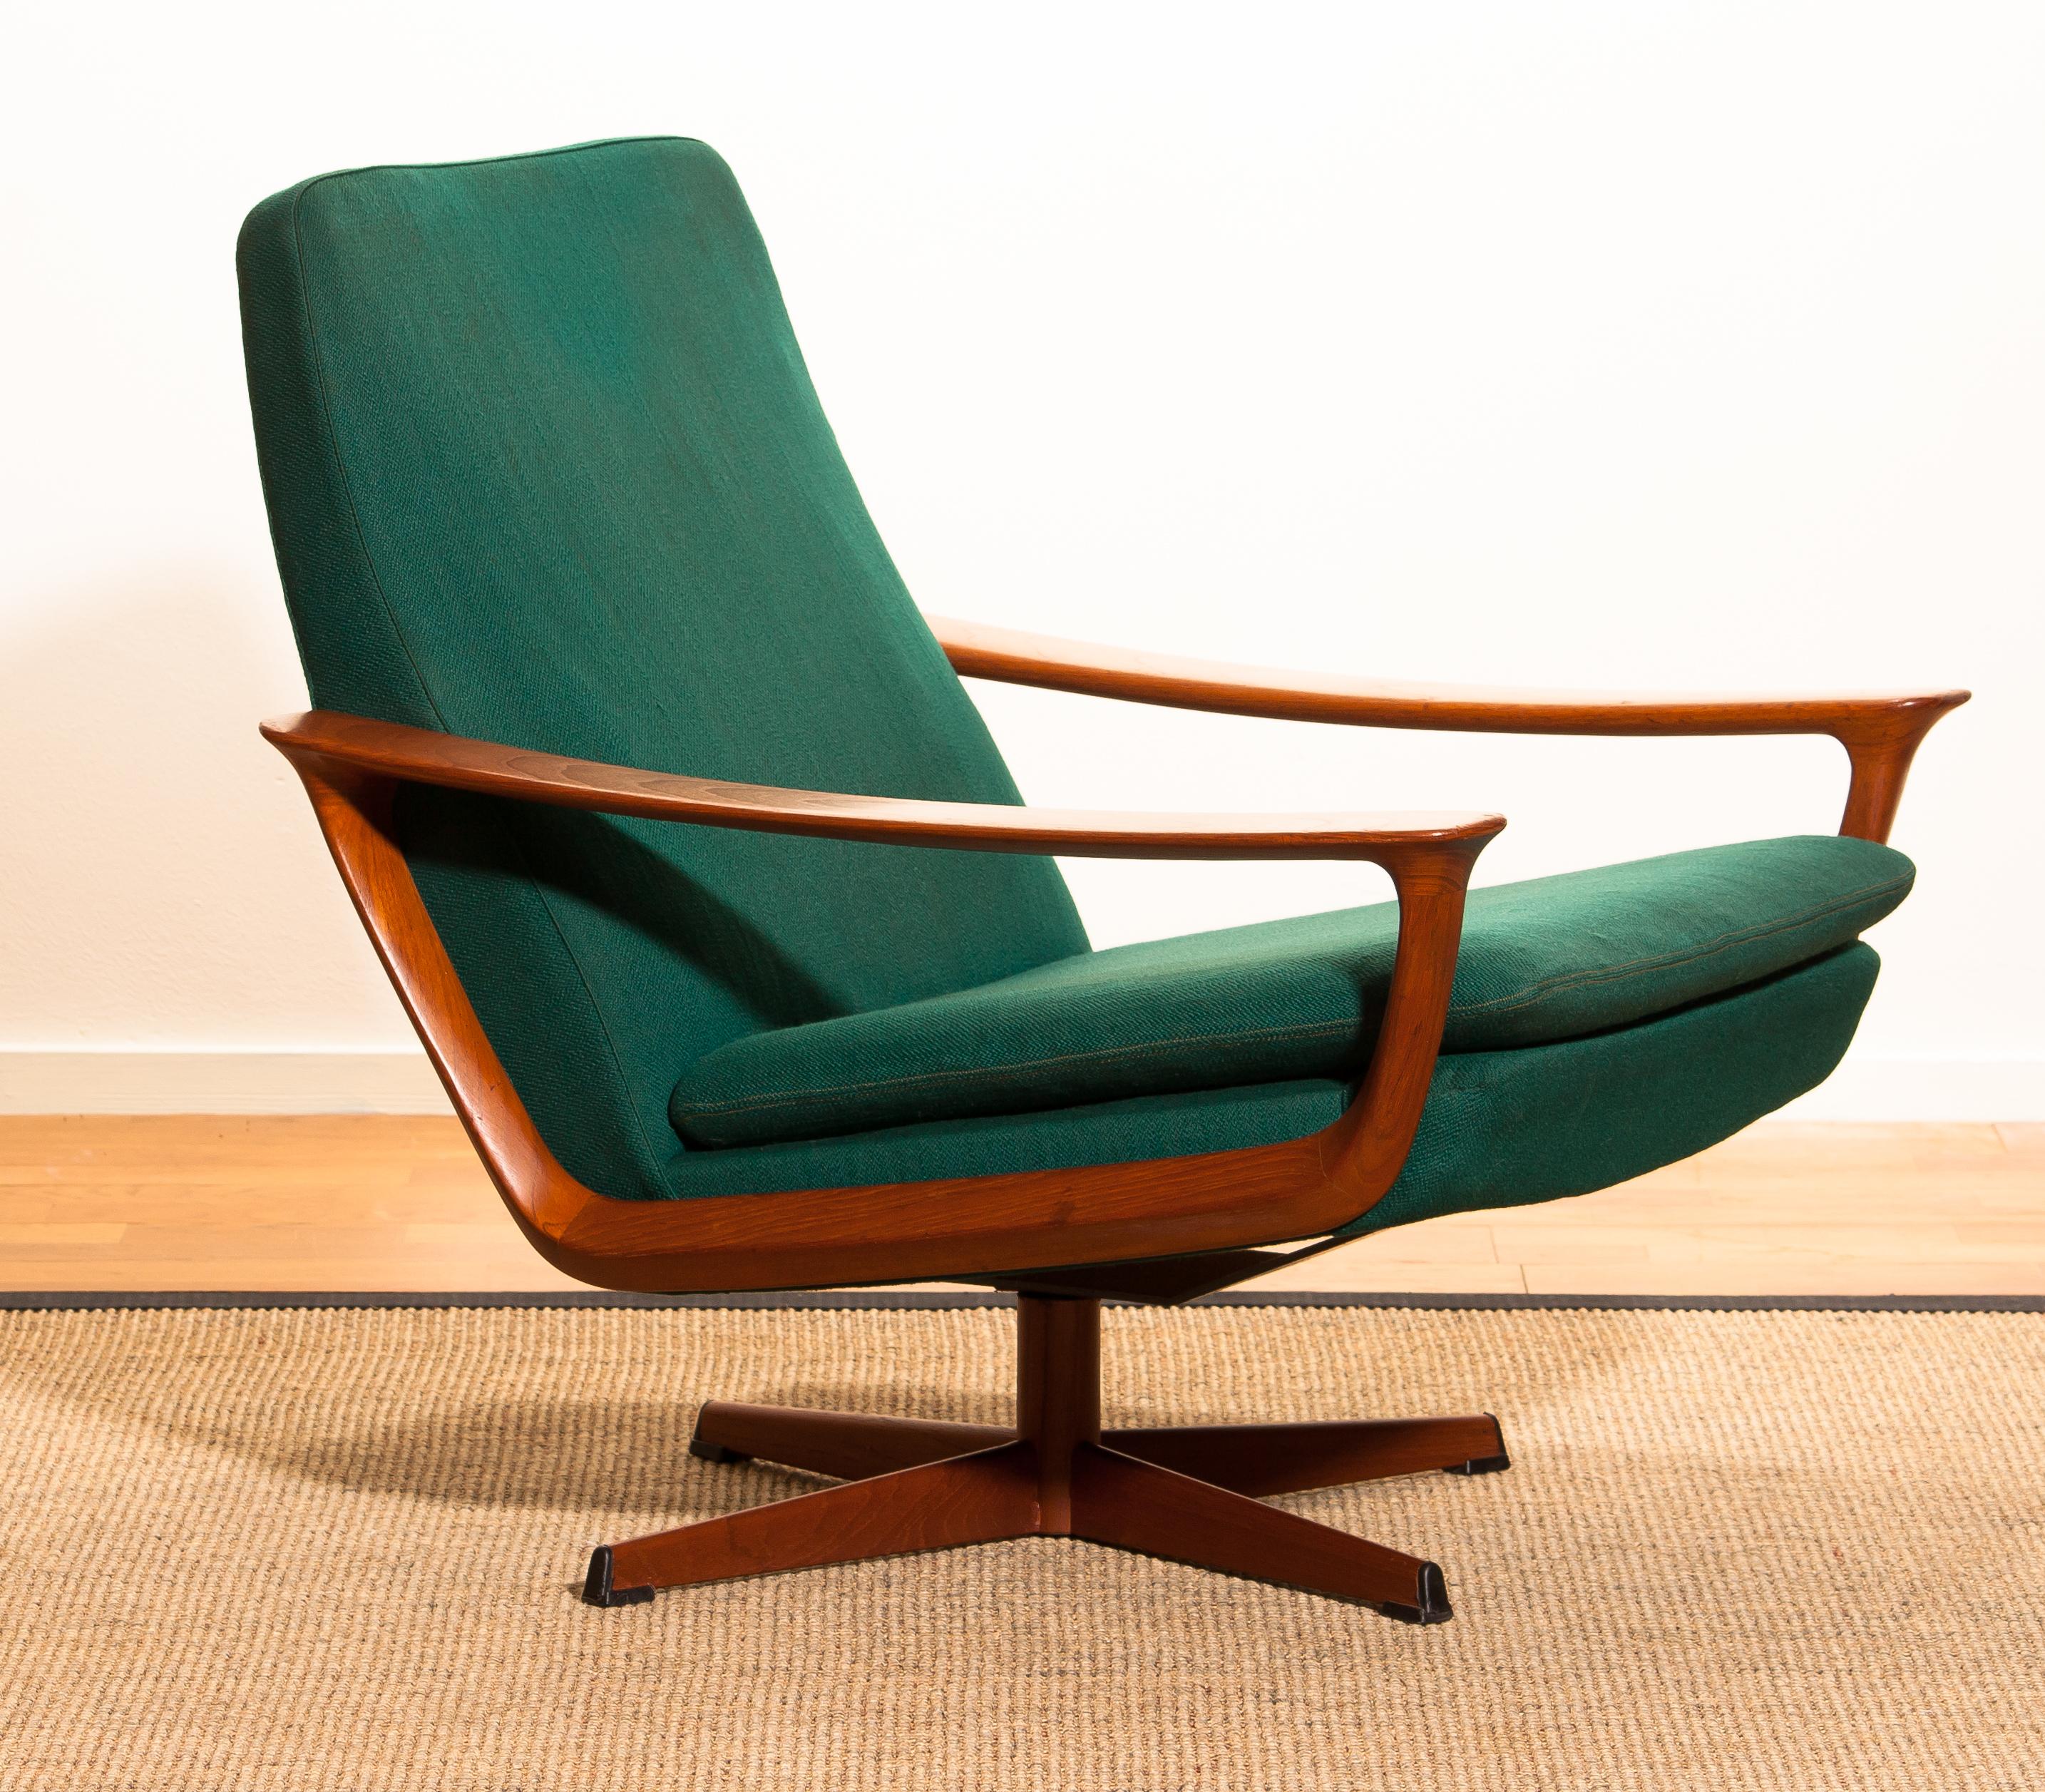 1960s, Teak Set of Two Swivel Chairs by Johannes Andersson for Trensum, Denmark 1